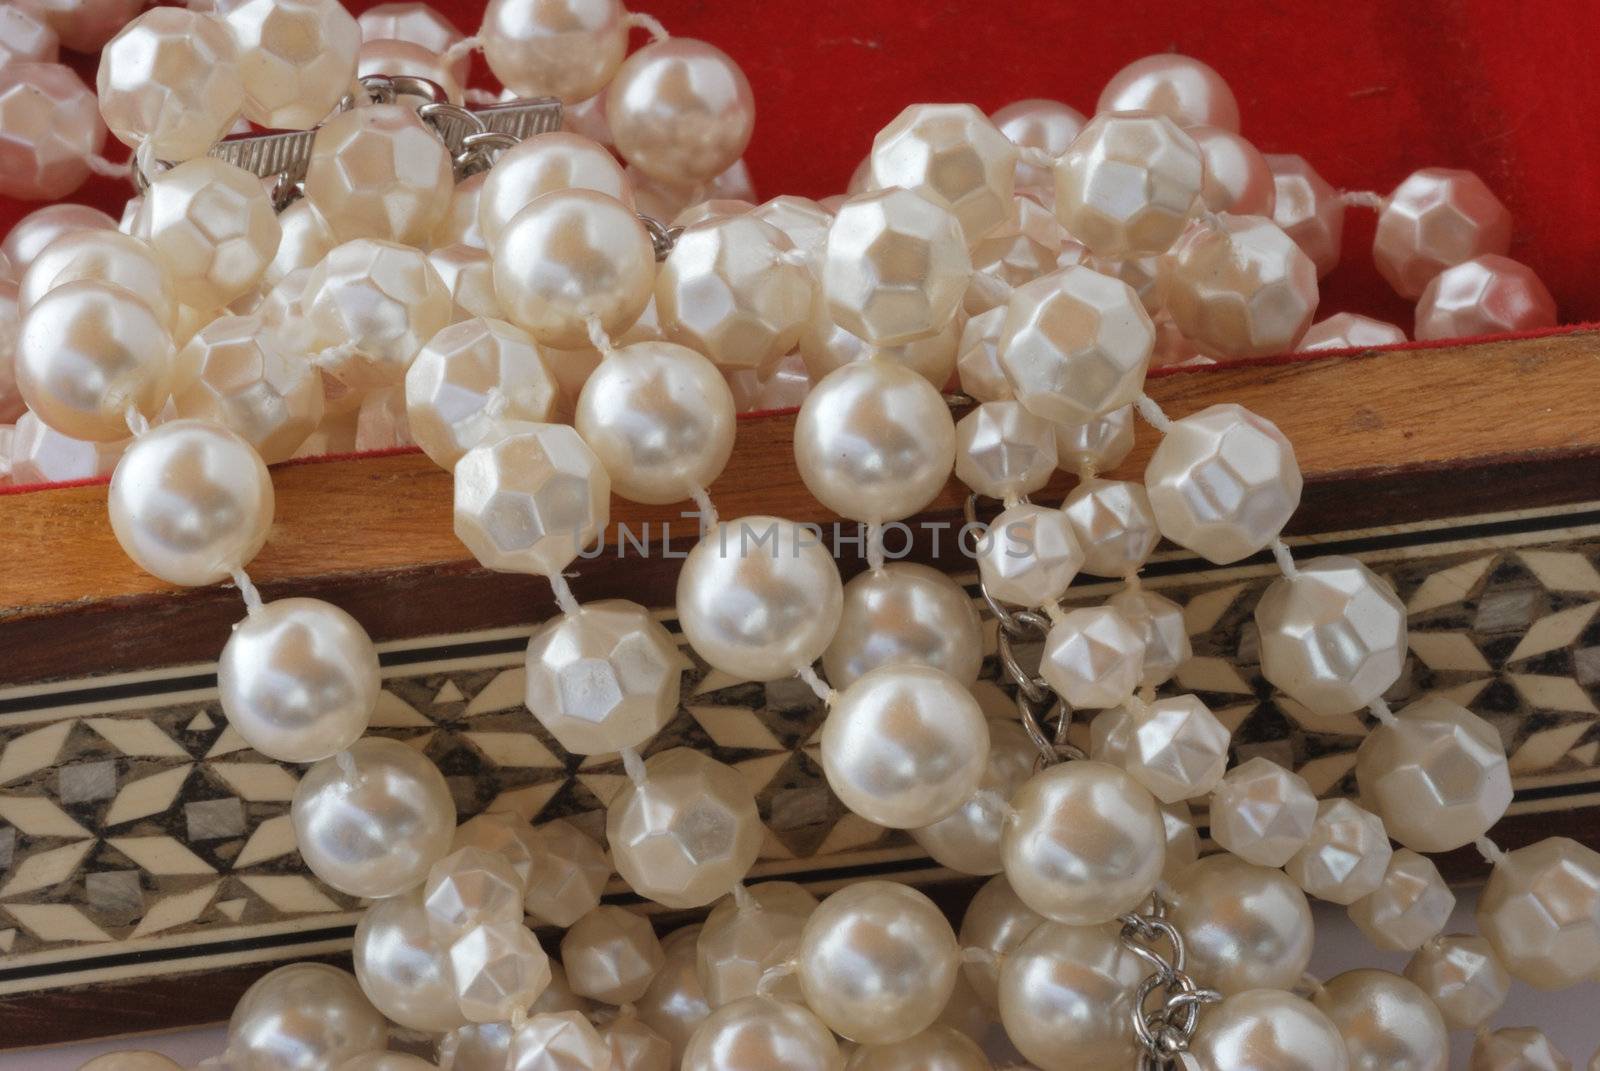 Close up of pearls in jewelry box